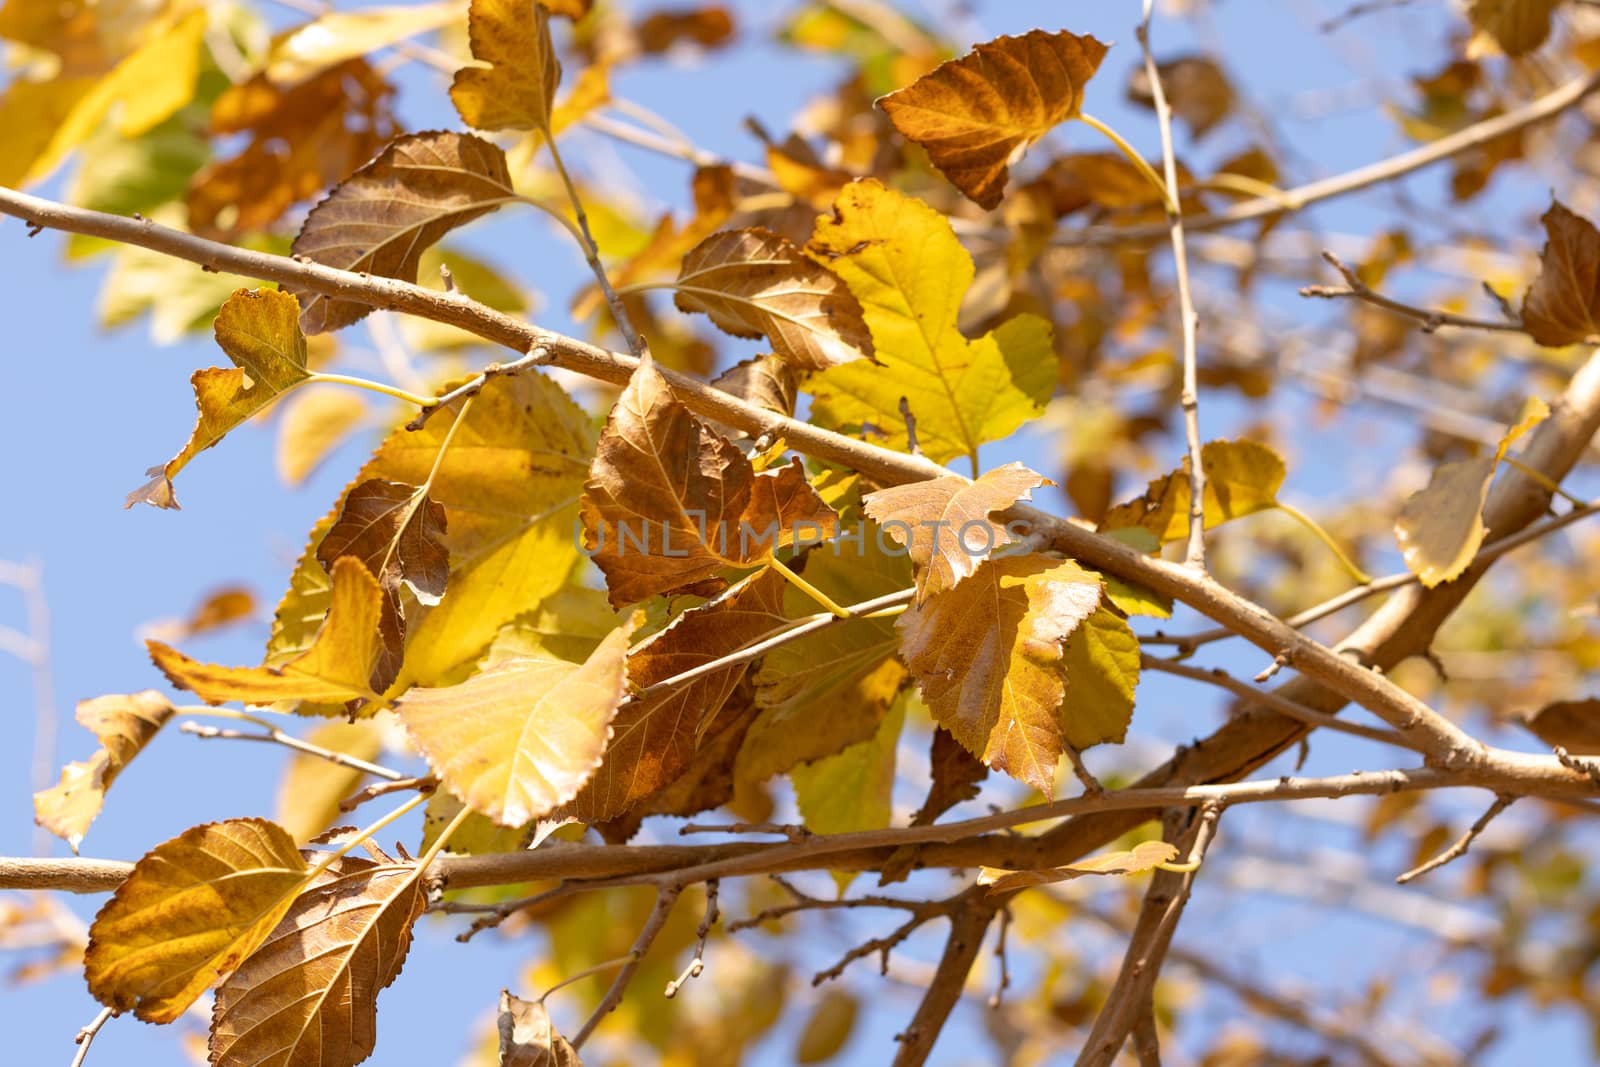 Yellow and dry leaves on a tree with some sunlight shining